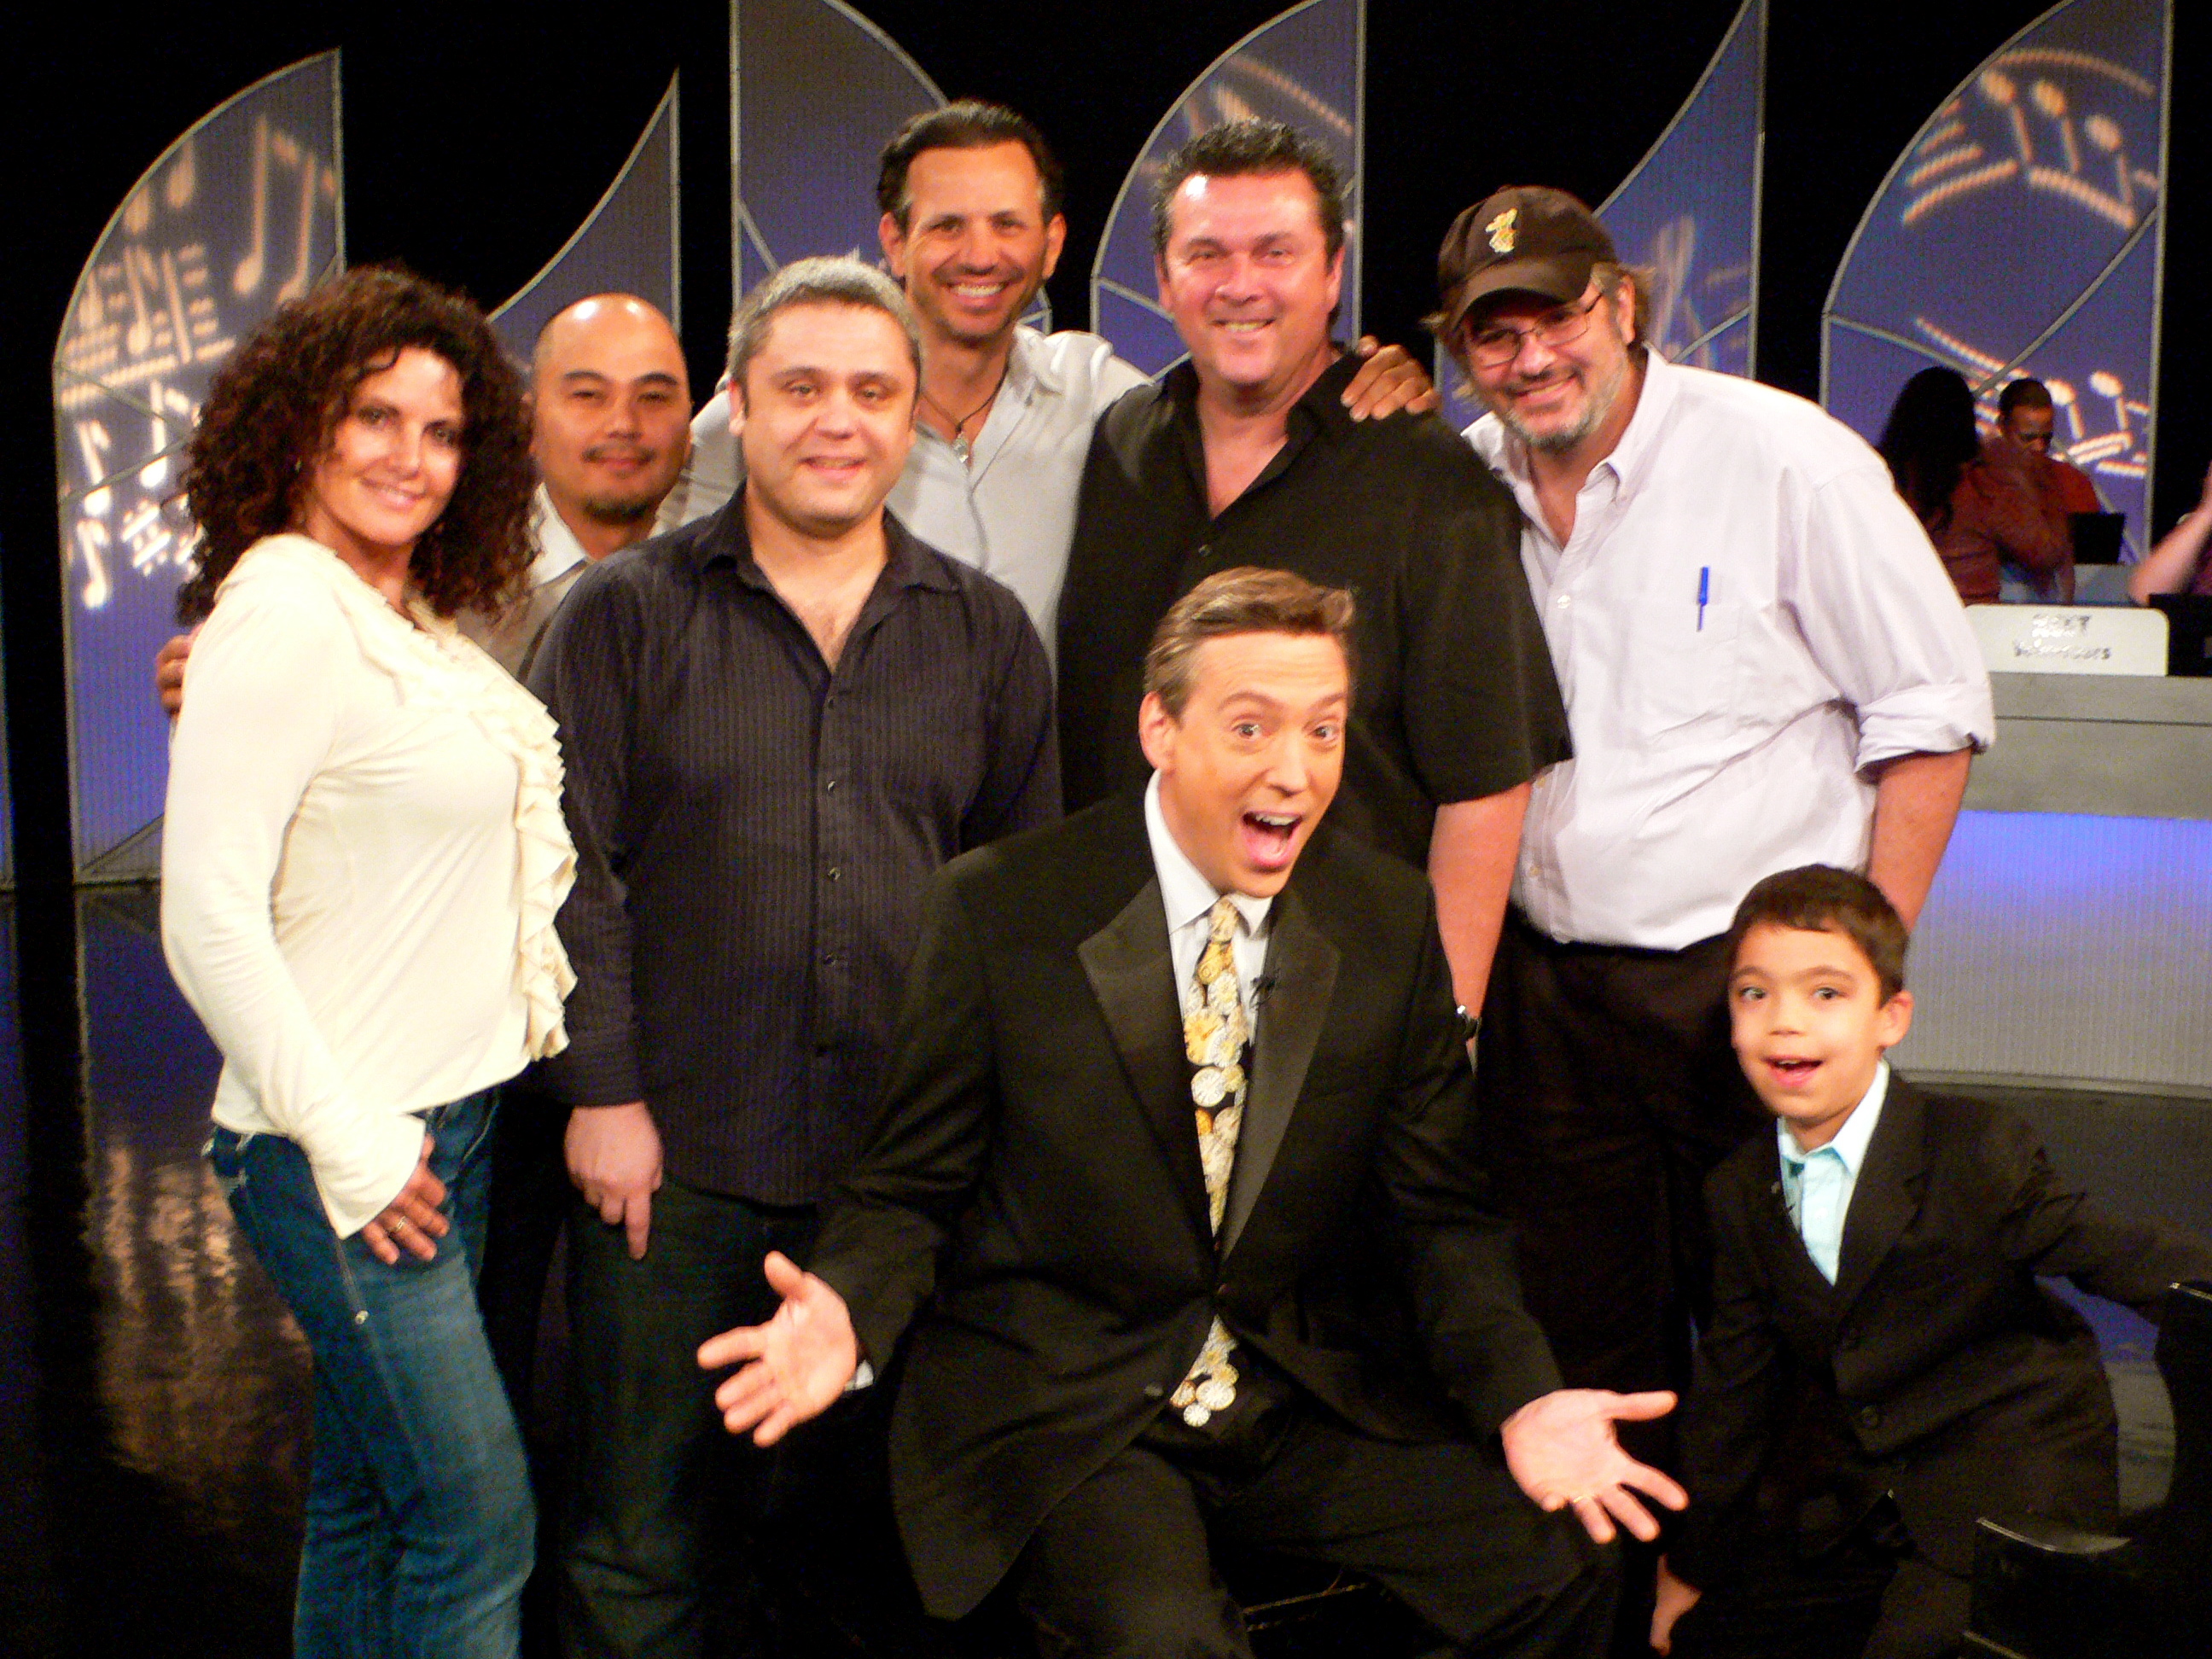 Travis, Brenda Markstein, Paul Faberman, Gene and Ethan Bortnick, at KCET for the debut 